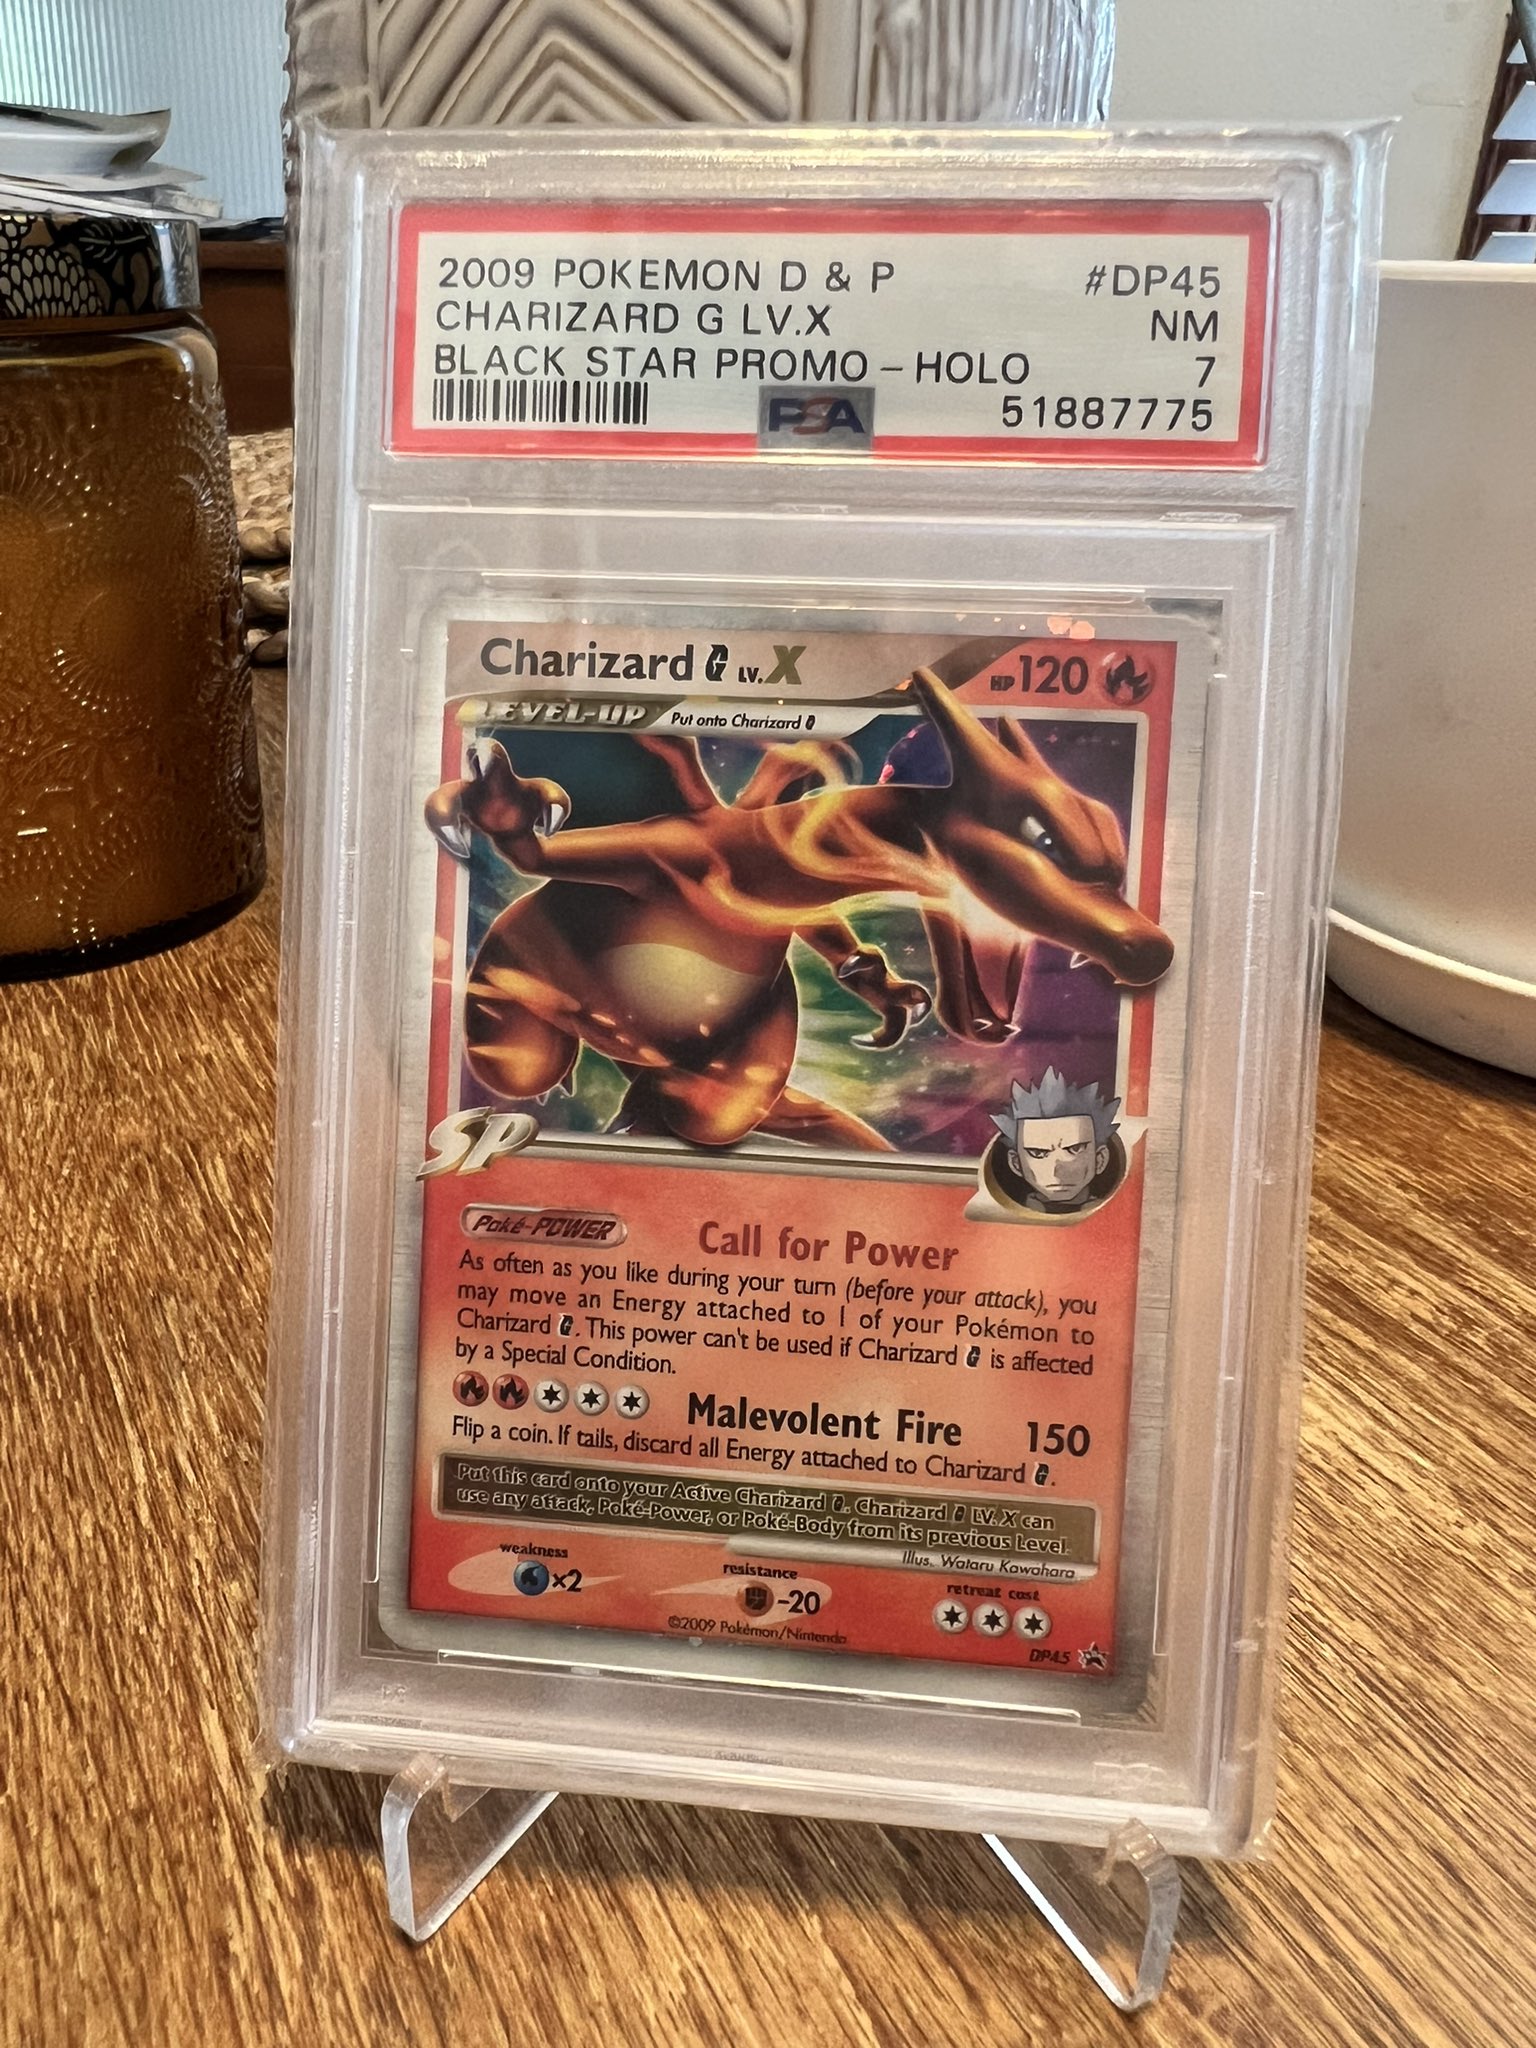 Blaze Poke Pulls on X: 🔥Pokémon Slab Sale🔥 PSA 7 Charizard G LV.X Black  Star Promo from Diamond & Pearl $65 Shipped w/Tracking If I like your  comment, the card is yours.